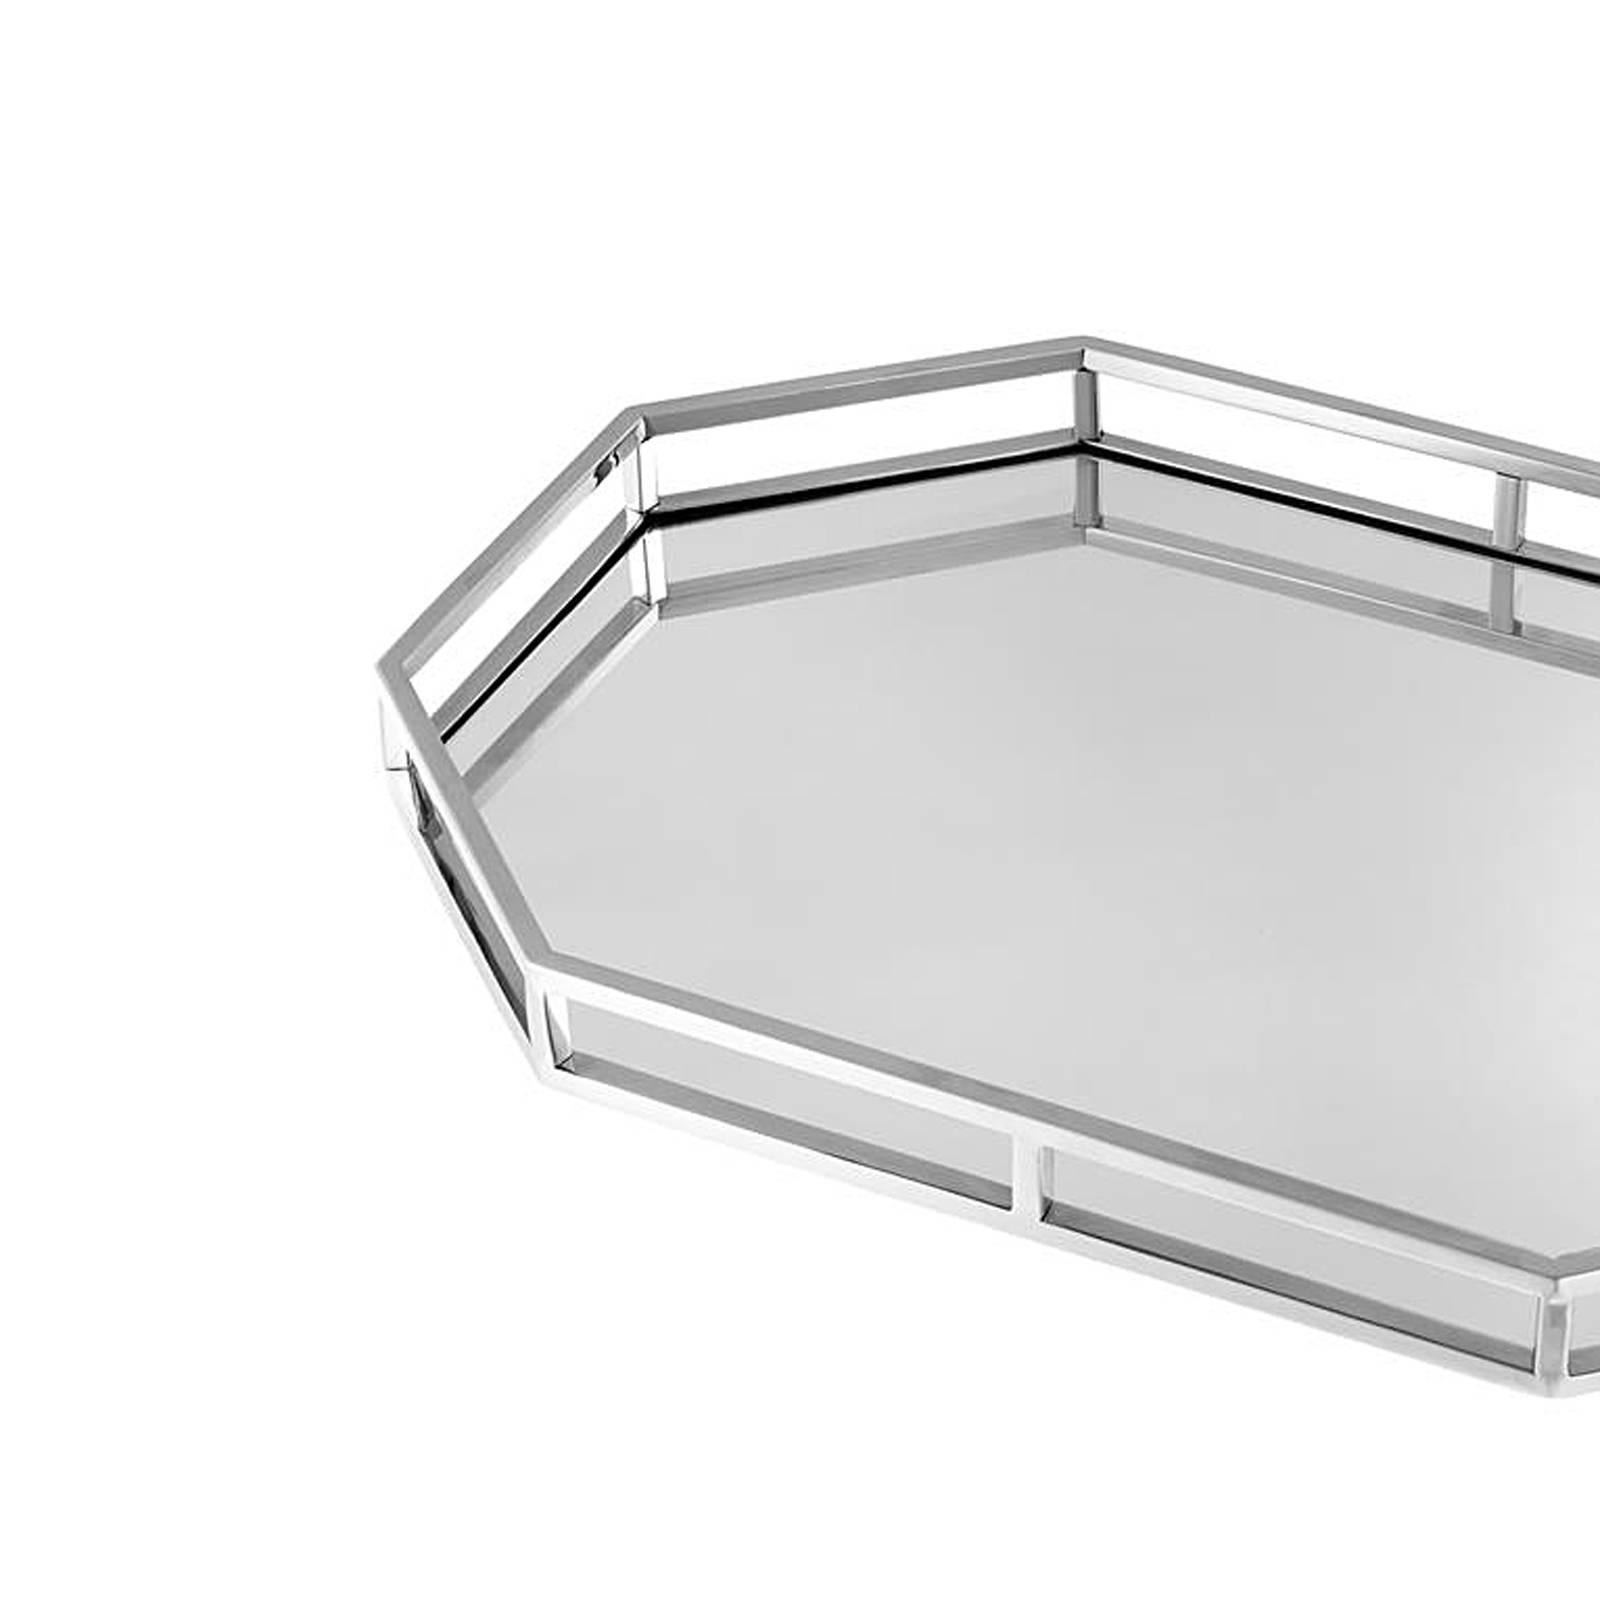 Tray Sigma in polished nickel finish
and mirror glass. Elegant serving piece.
